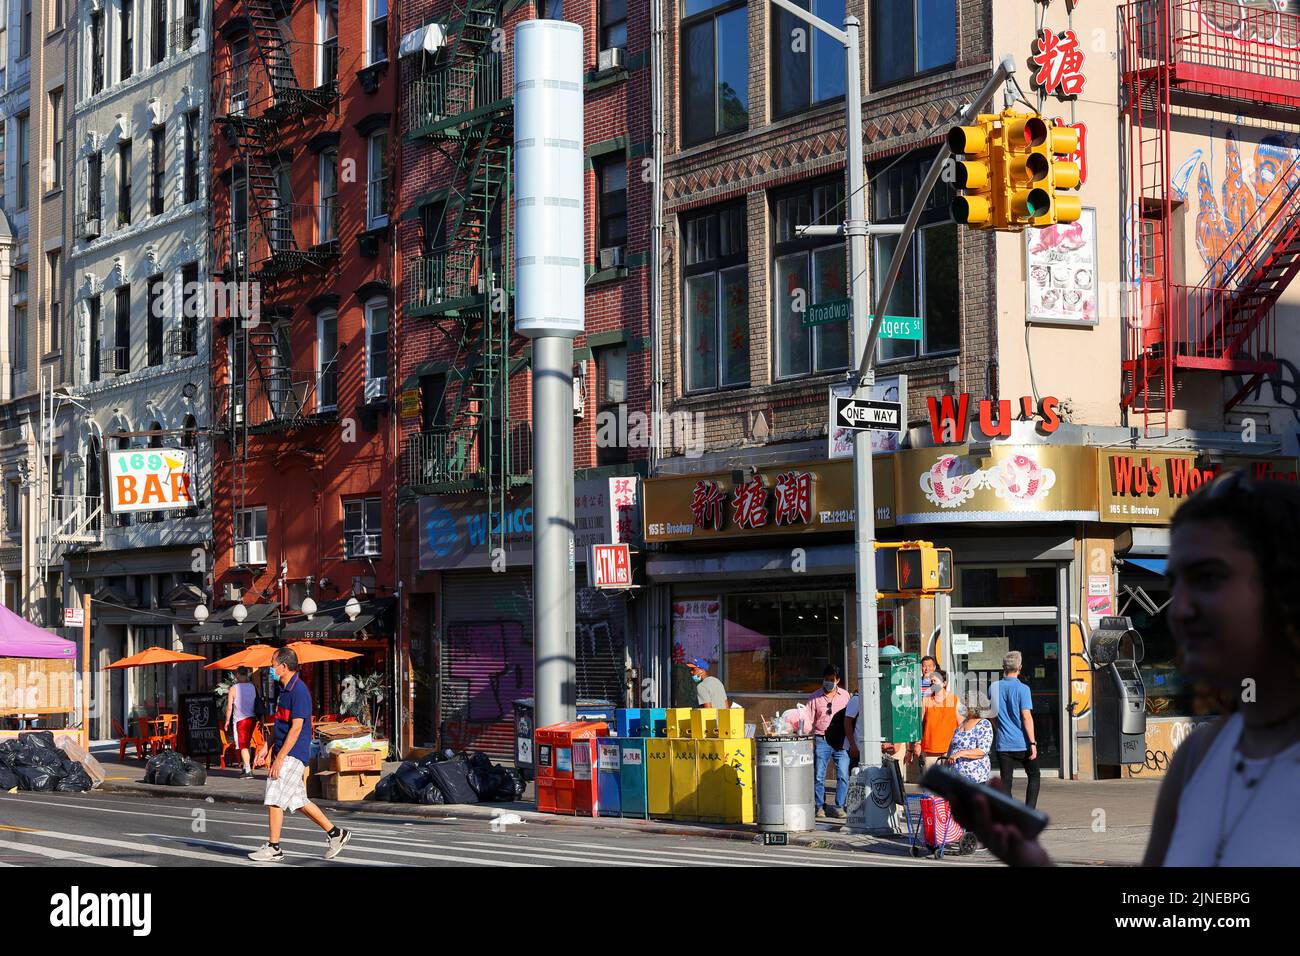 A LinkNYC Link5G 5G WiFi kiosk in Manhattan Chinatown, New York. The gigantic 32 foot smartpoles replace older LinkNYC 4G wi-fi kiosks under a new ... Stock Photo